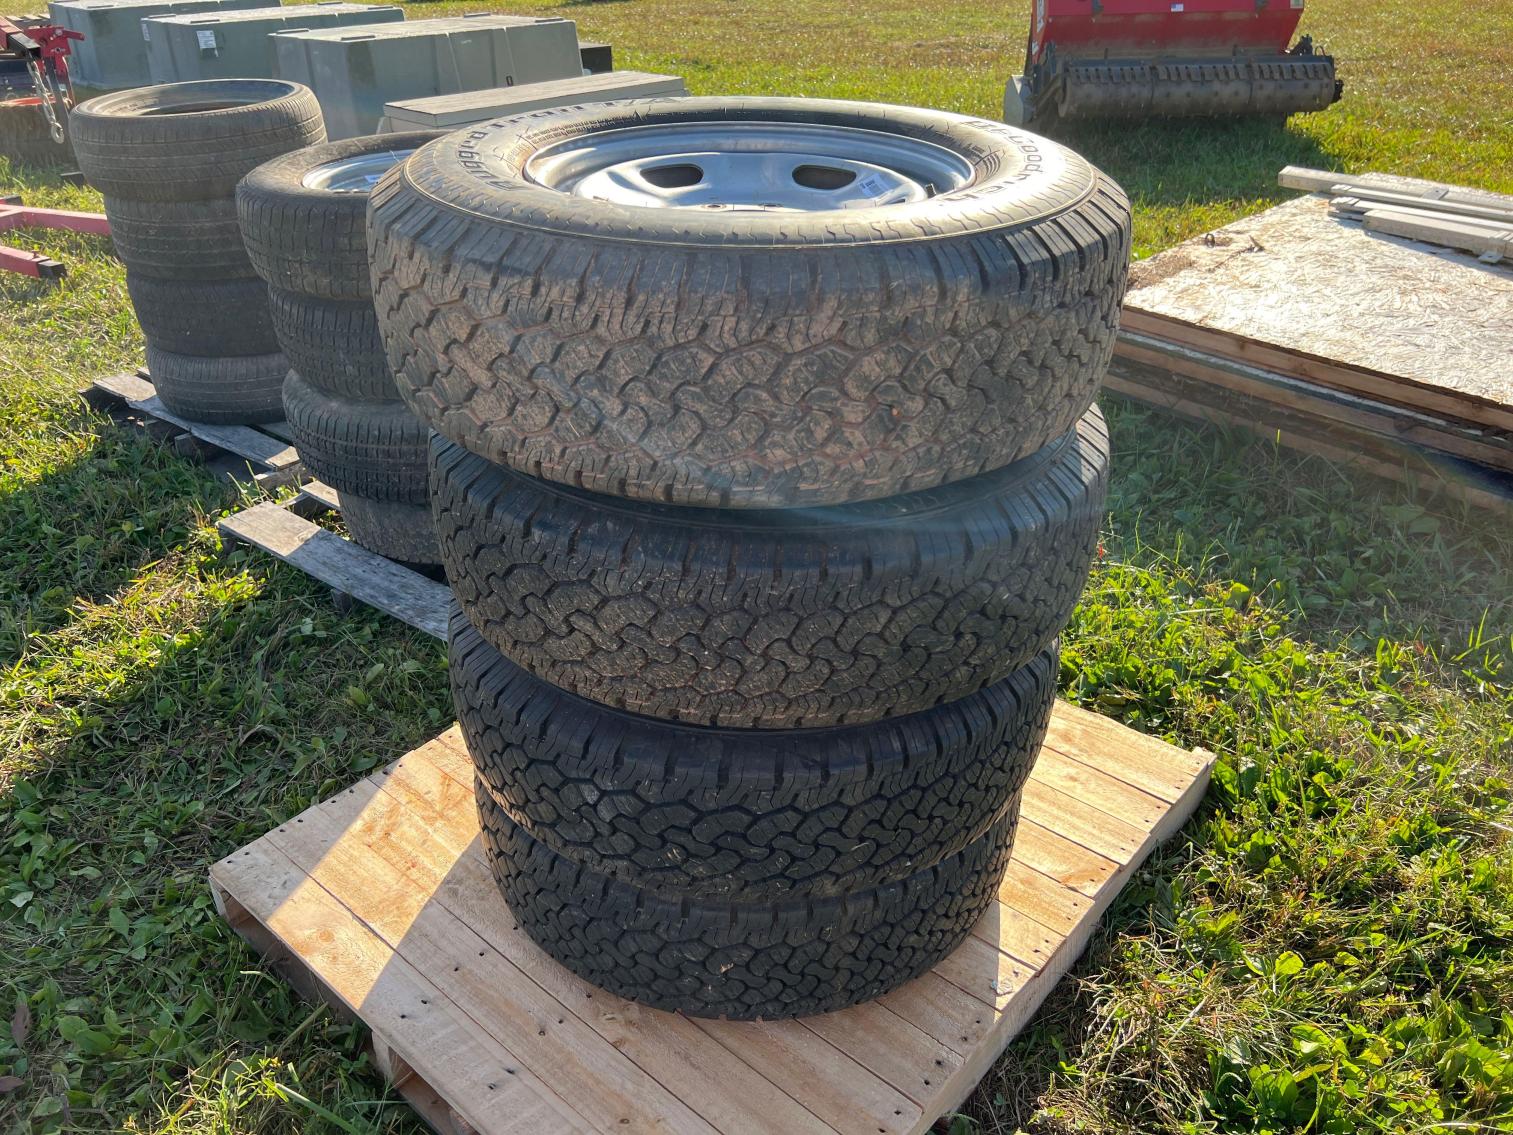 Image for Set of 4 Tires and Wheels, BF Goodrich Rugged Trail Tires size 2457517, per seller off of F250